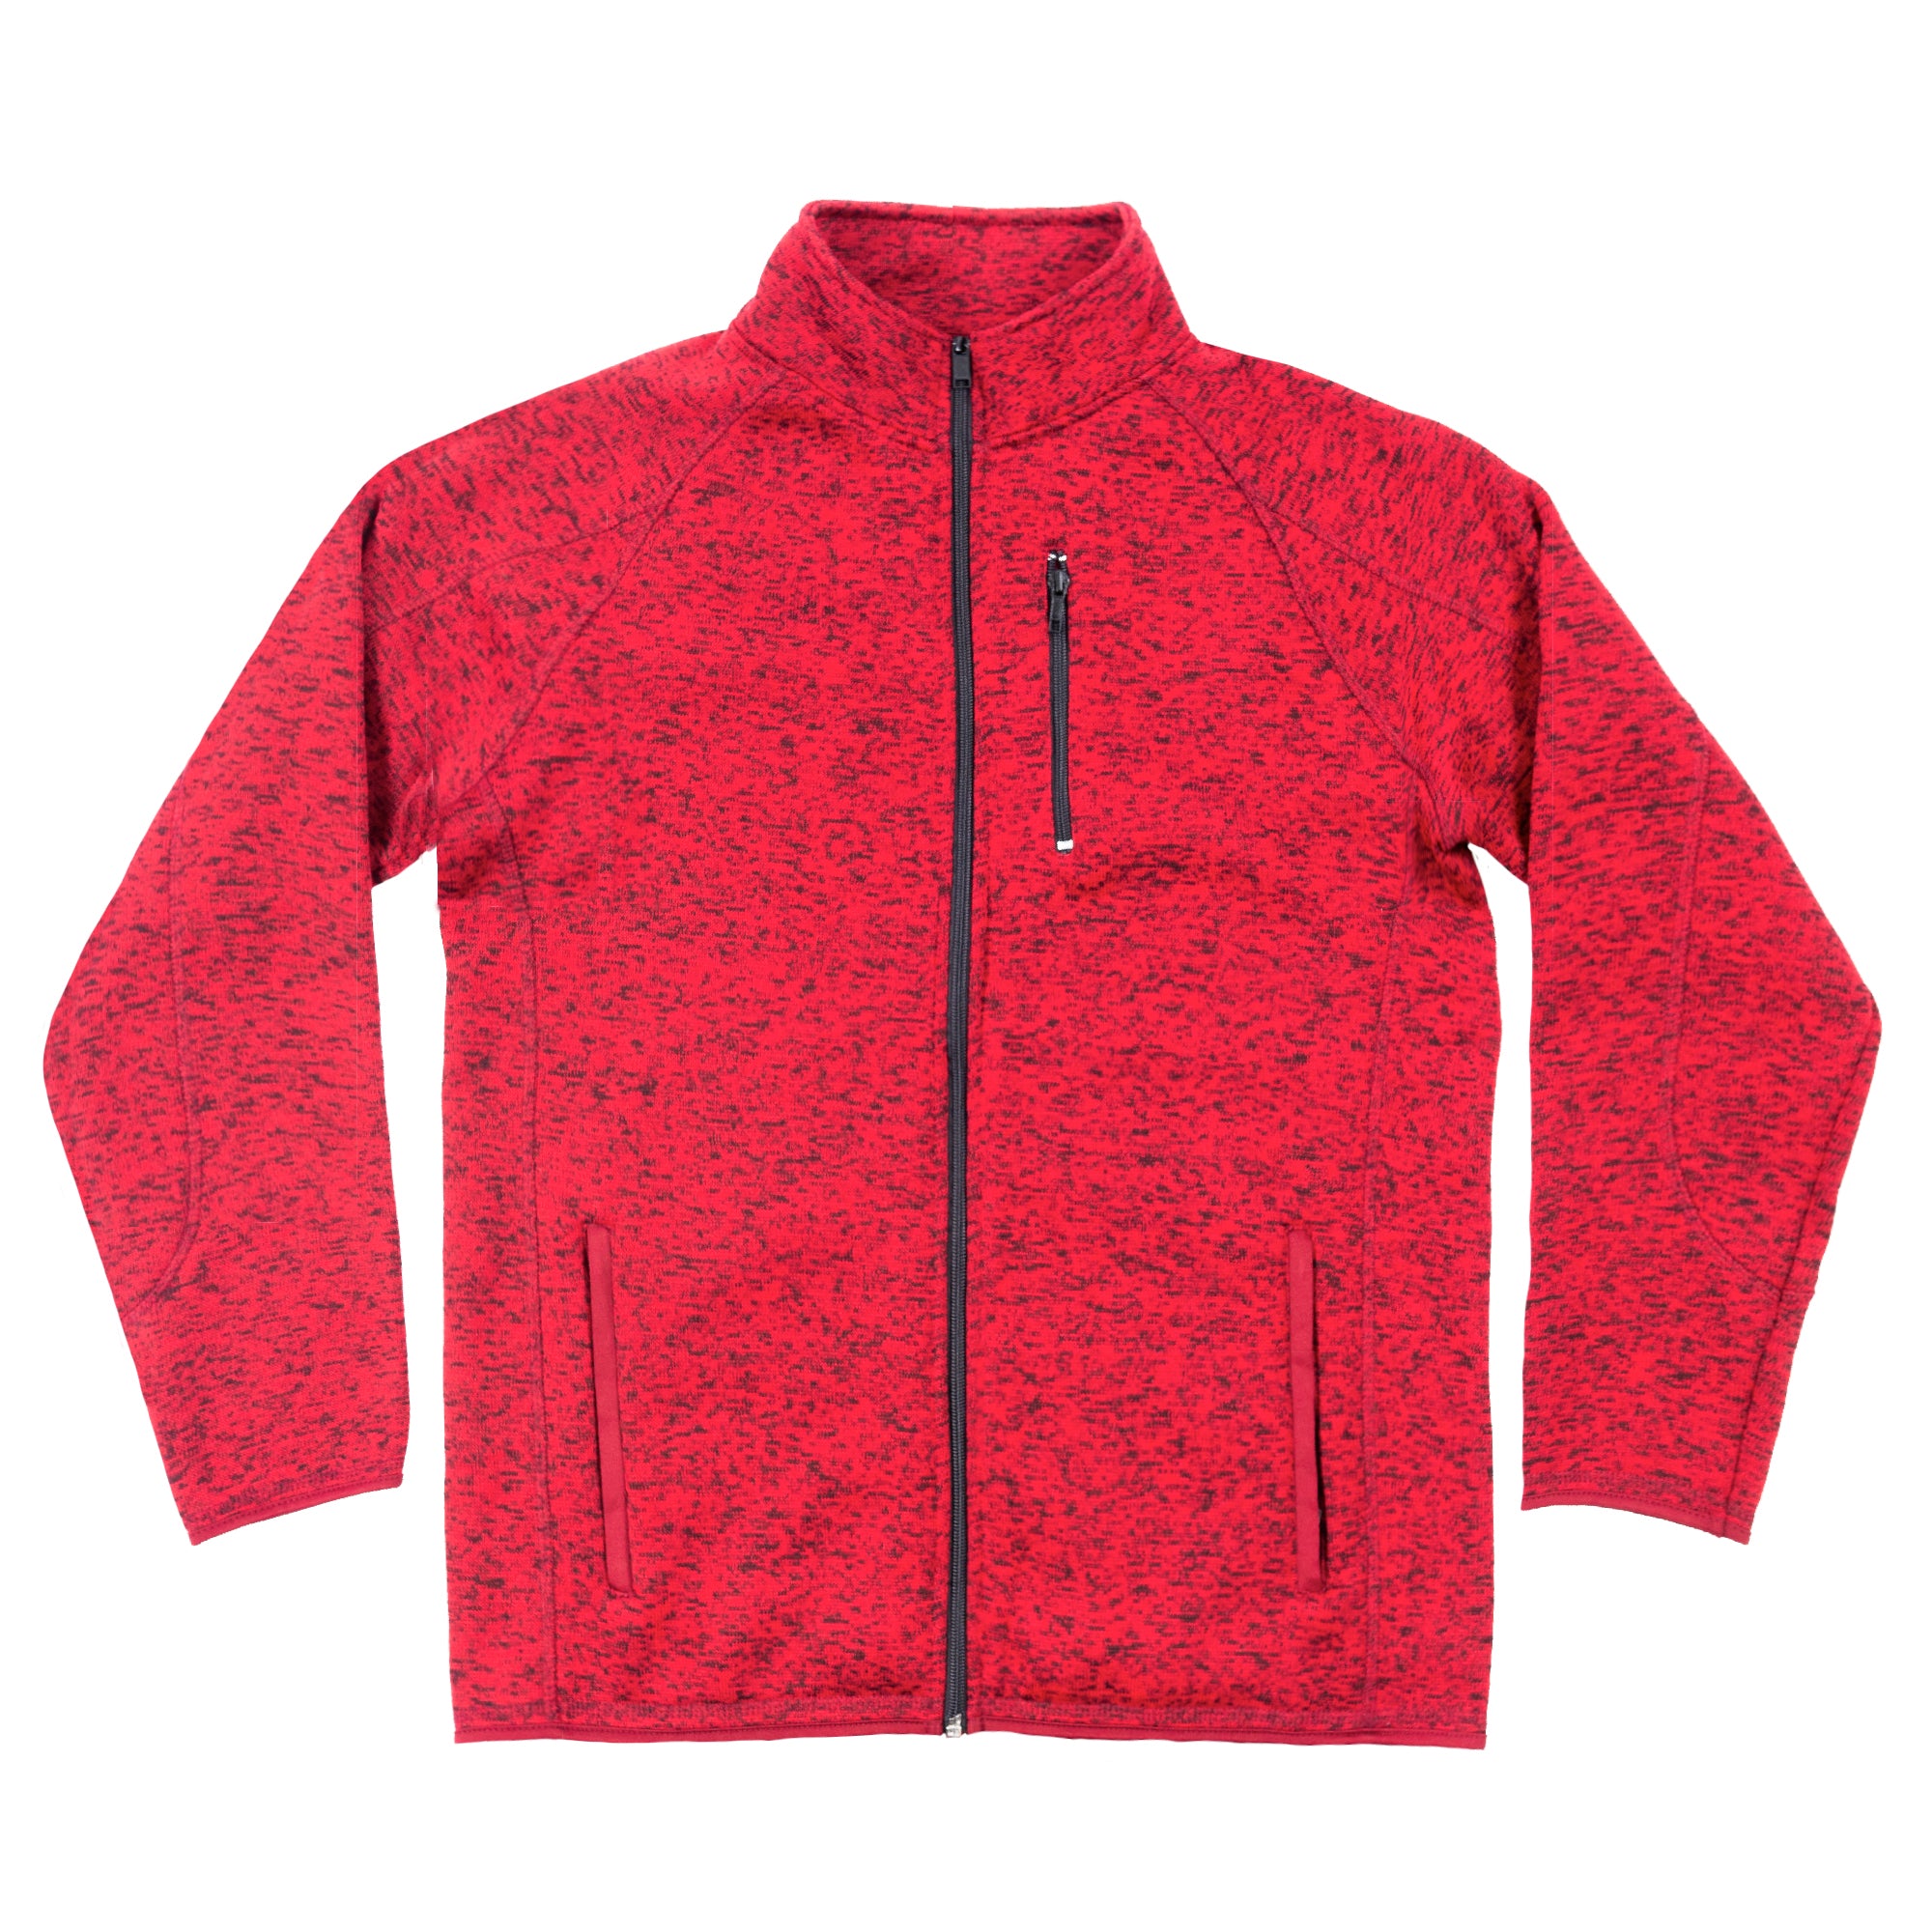 Buy heather-red LONG SLEEVE SWEATER KNIT JACKET